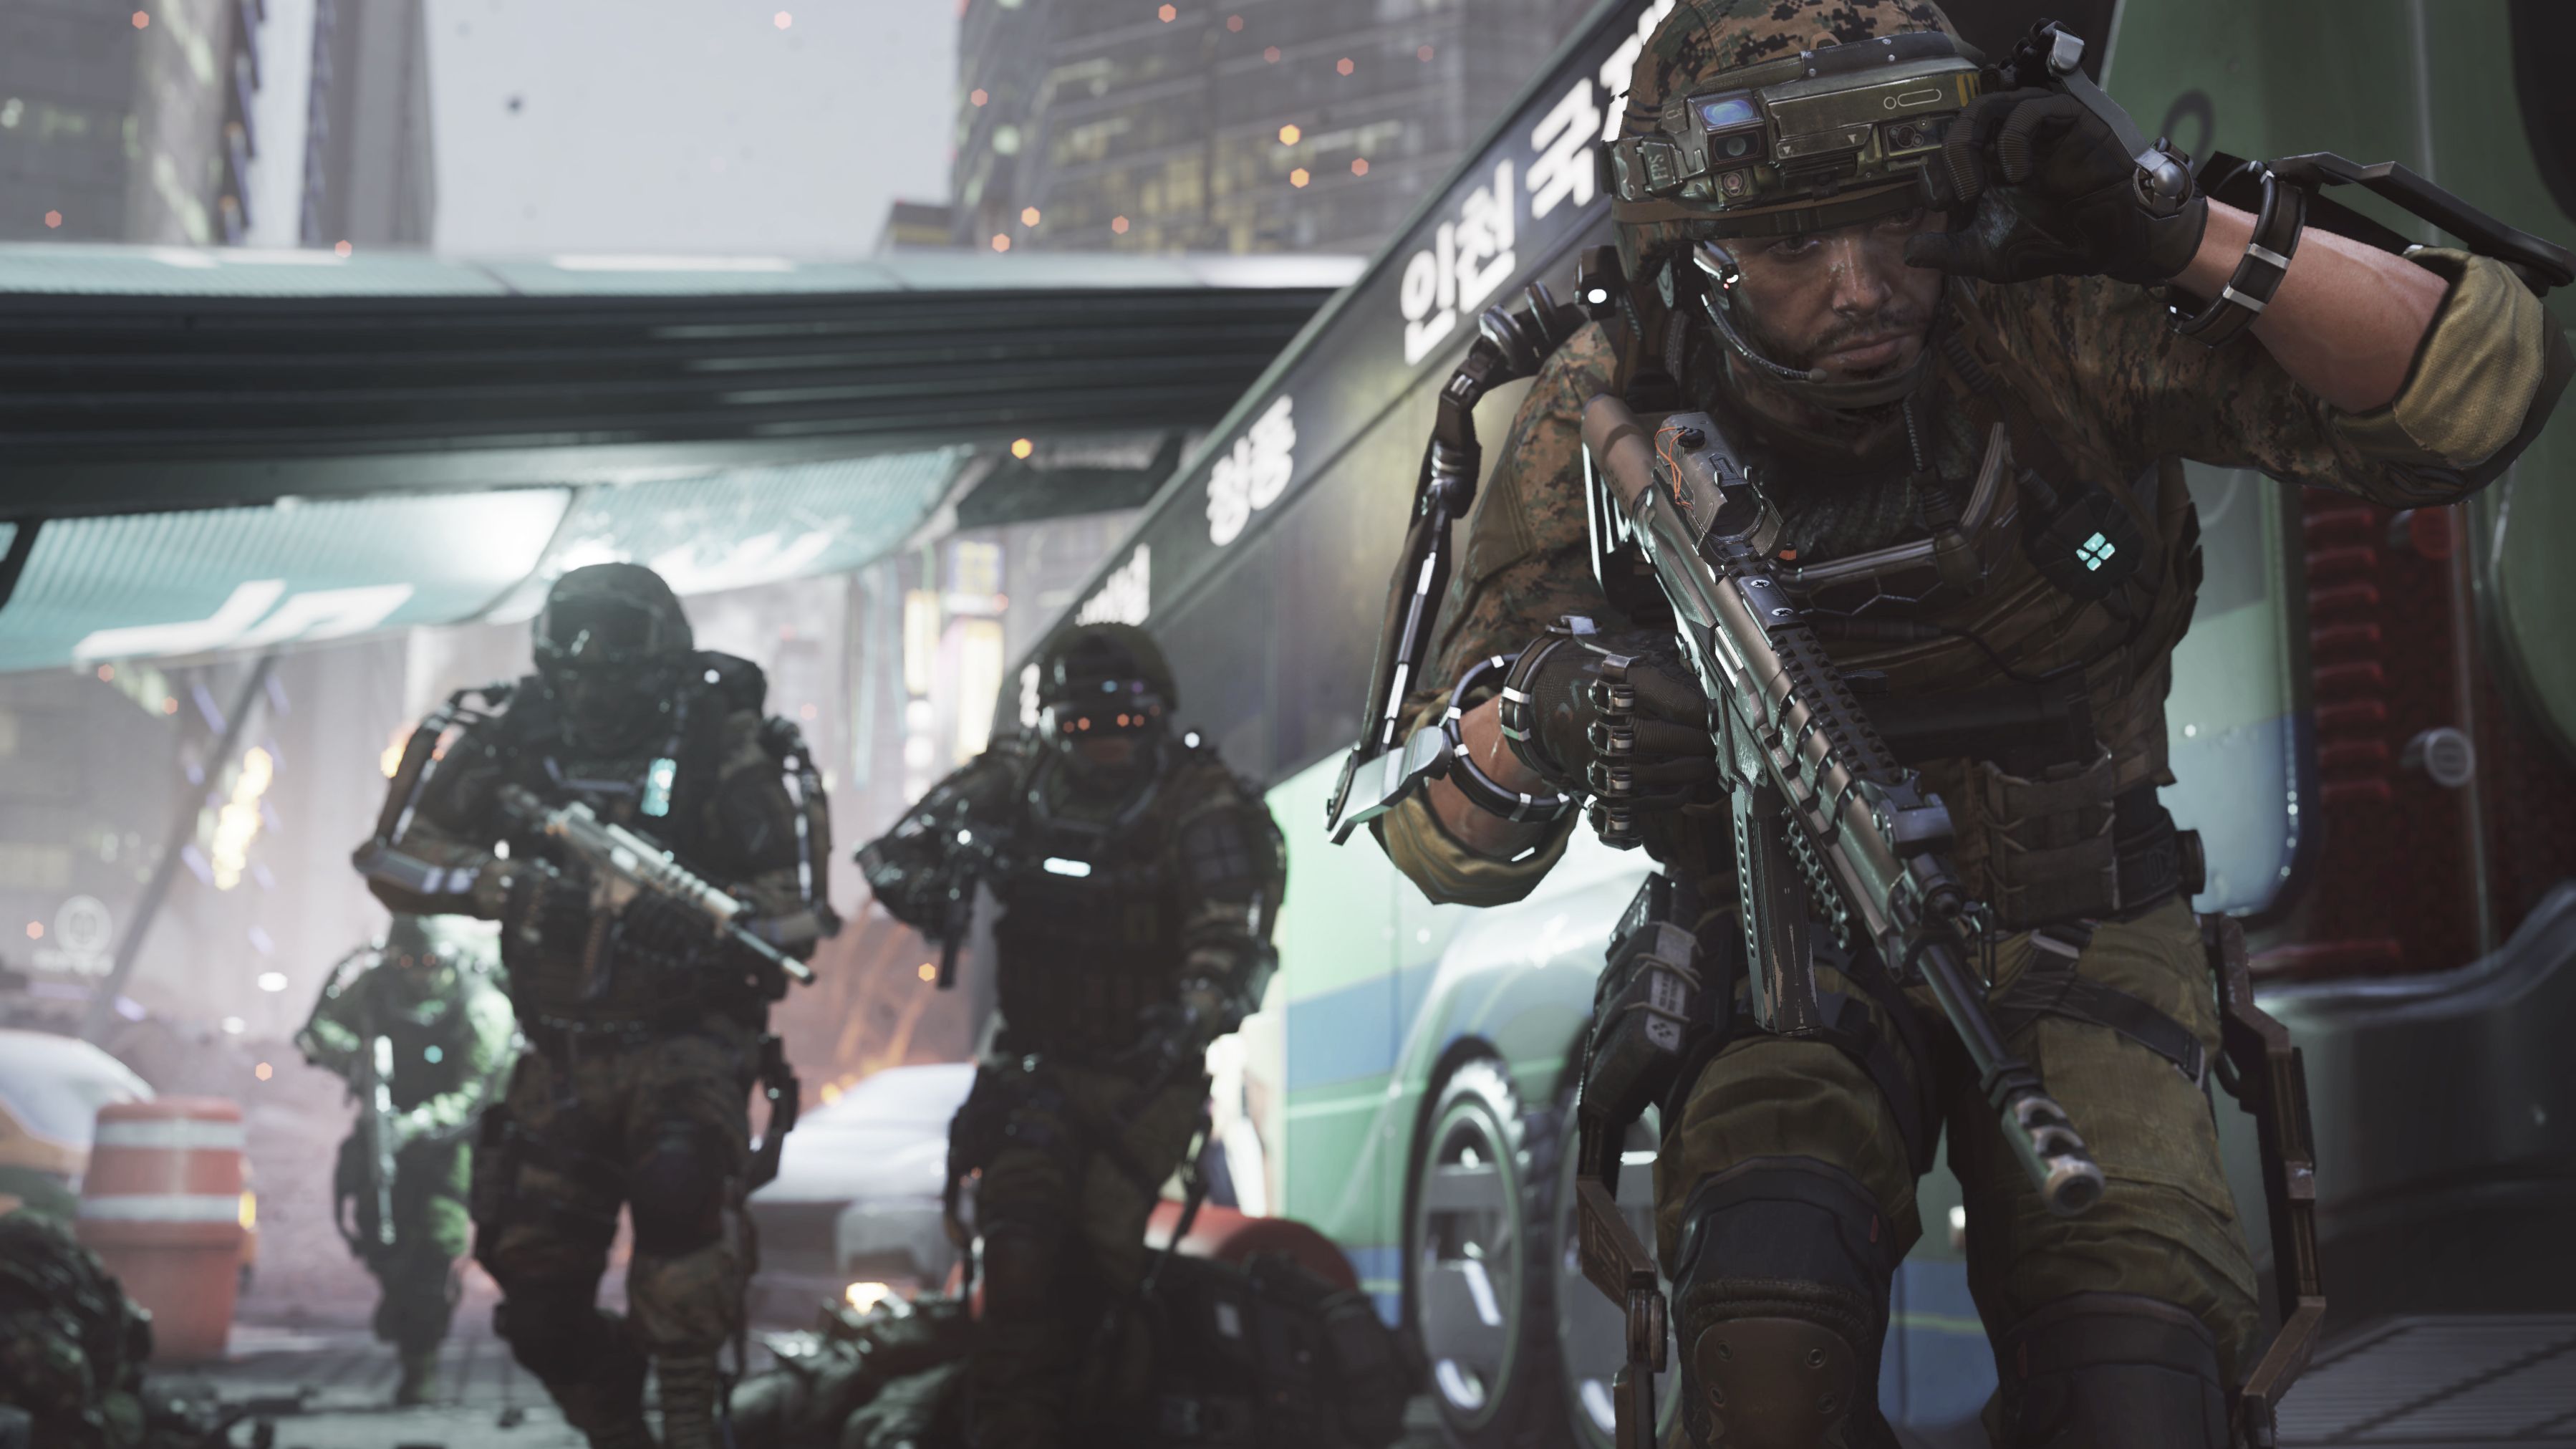 call of duty advanced warfare preview invisibility guns grenades and jetpacks in 2058 image 1